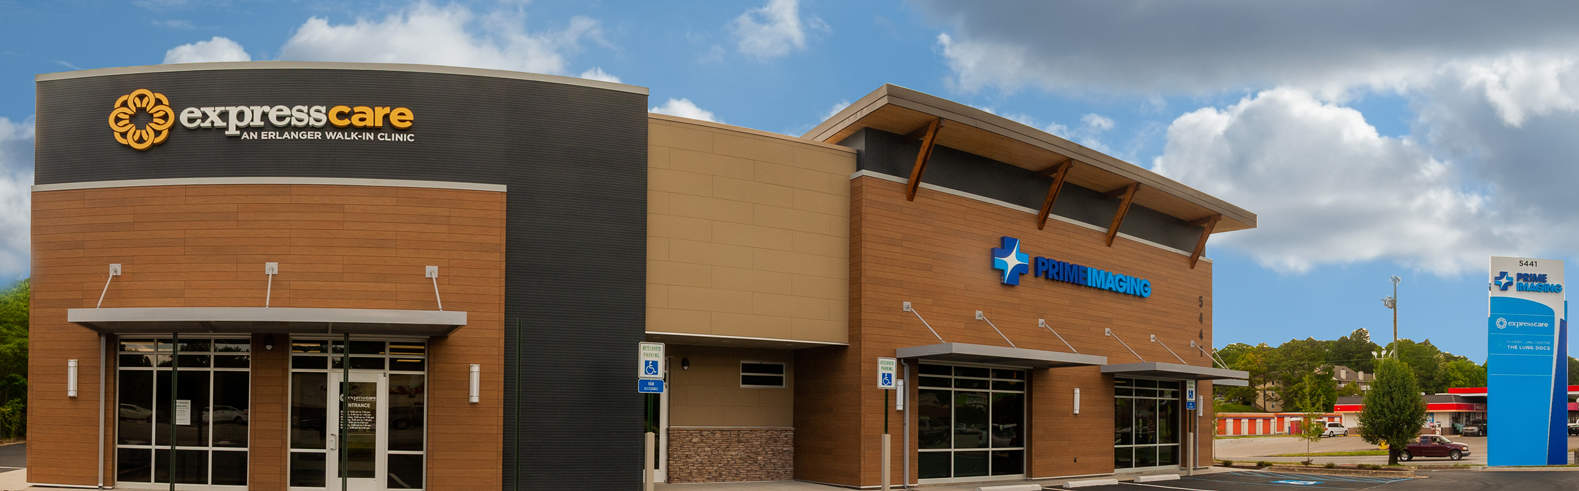 Photo of Erlanger Express Care and Prime Imaging location in Hixson, TN